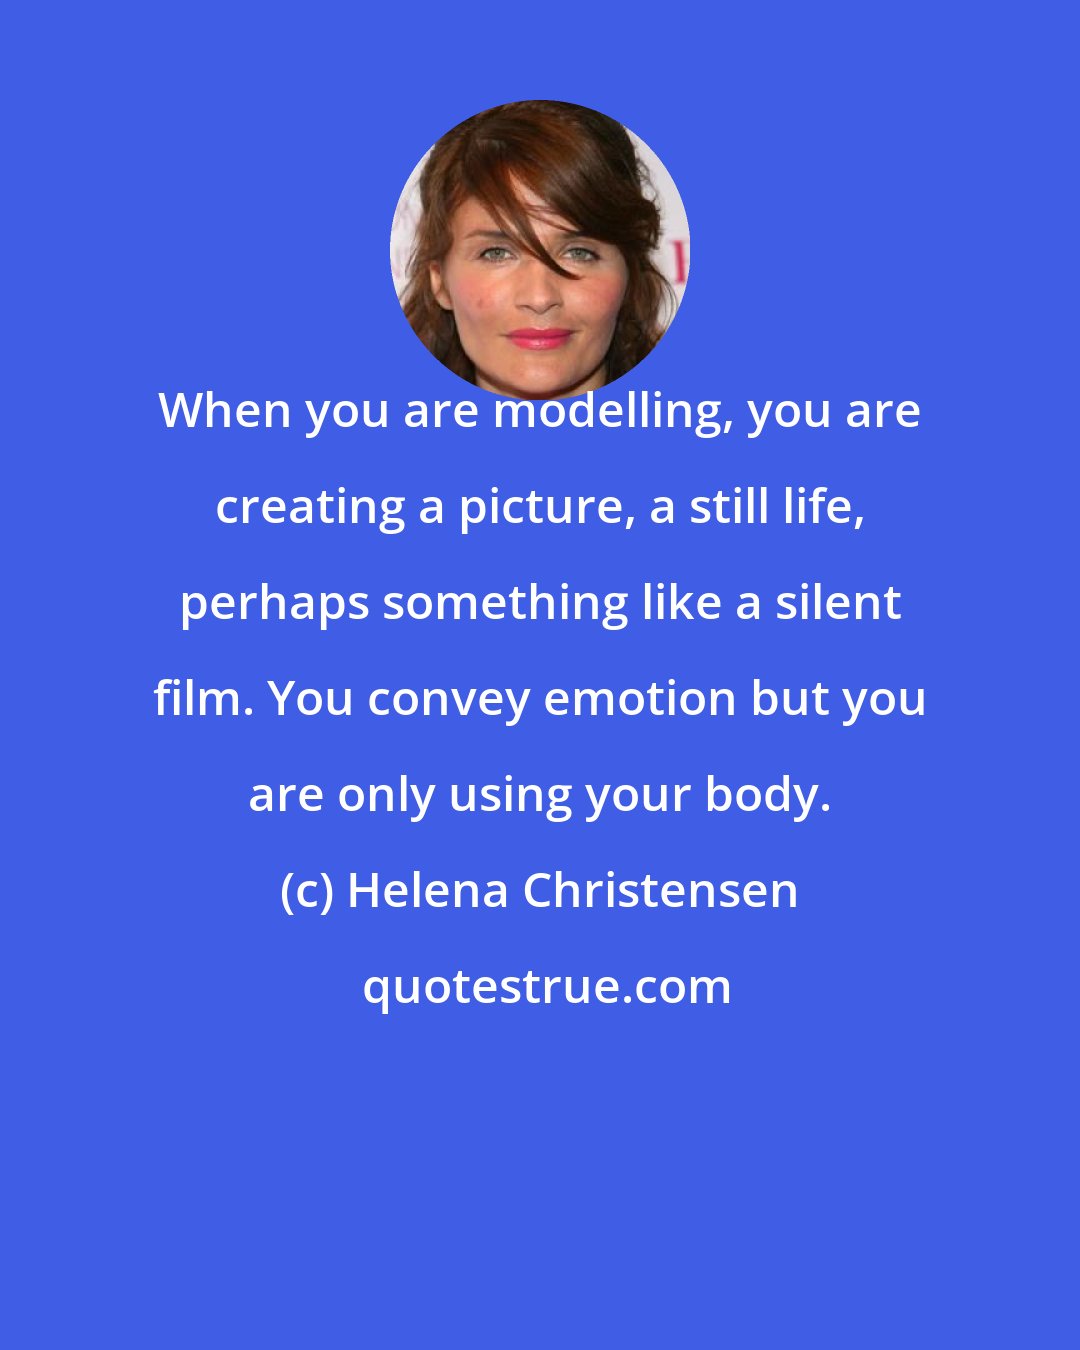 Helena Christensen: When you are modelling, you are creating a picture, a still life, perhaps something like a silent film. You convey emotion but you are only using your body.